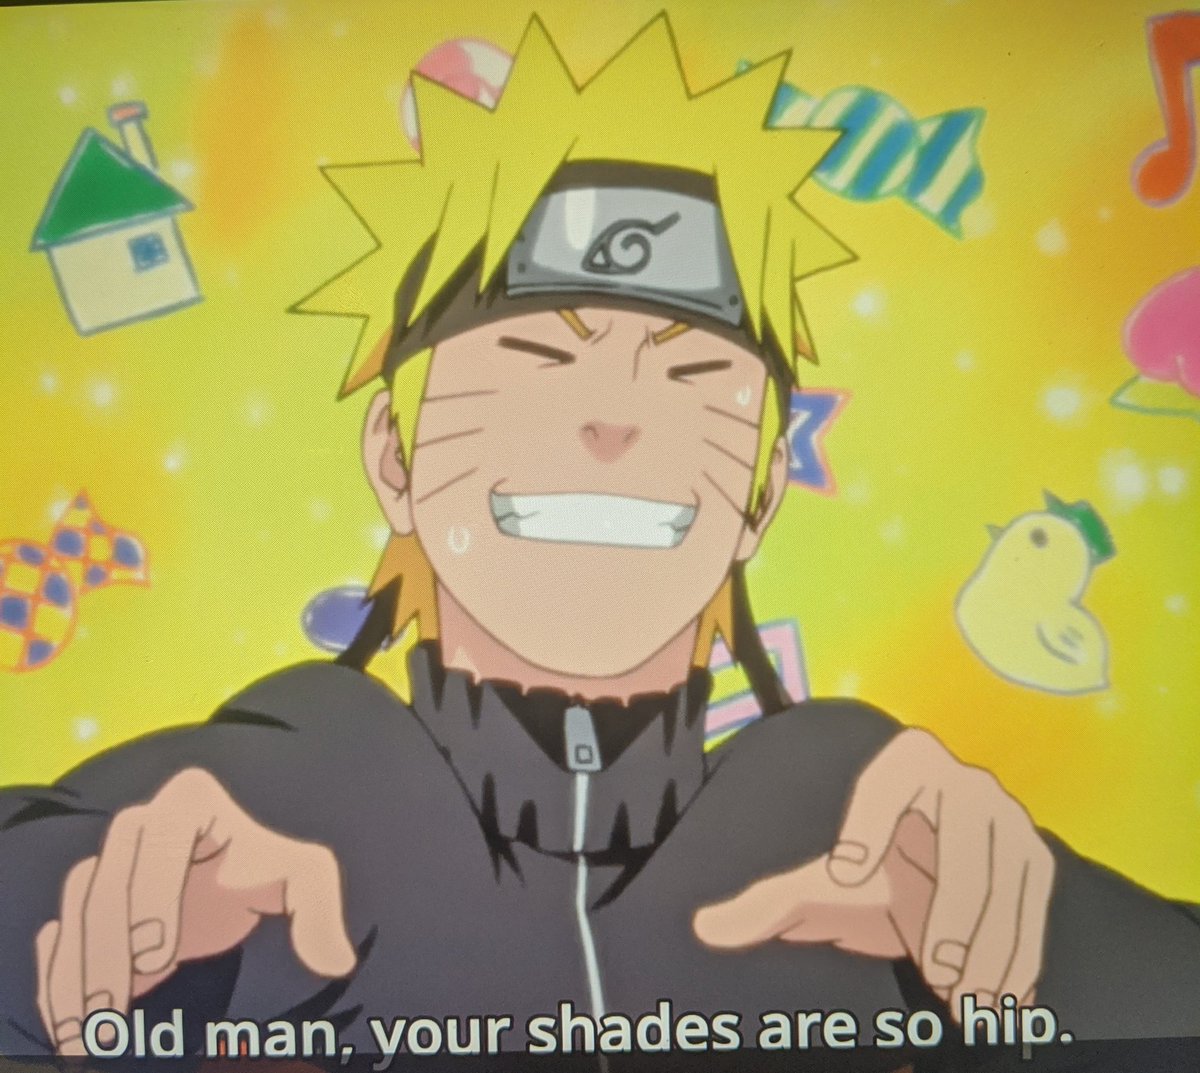 HELP NARUTO IS TRYING TO IMPRESS BEE BY RAPPING AND ITS SO FUNNY IM PEEINH